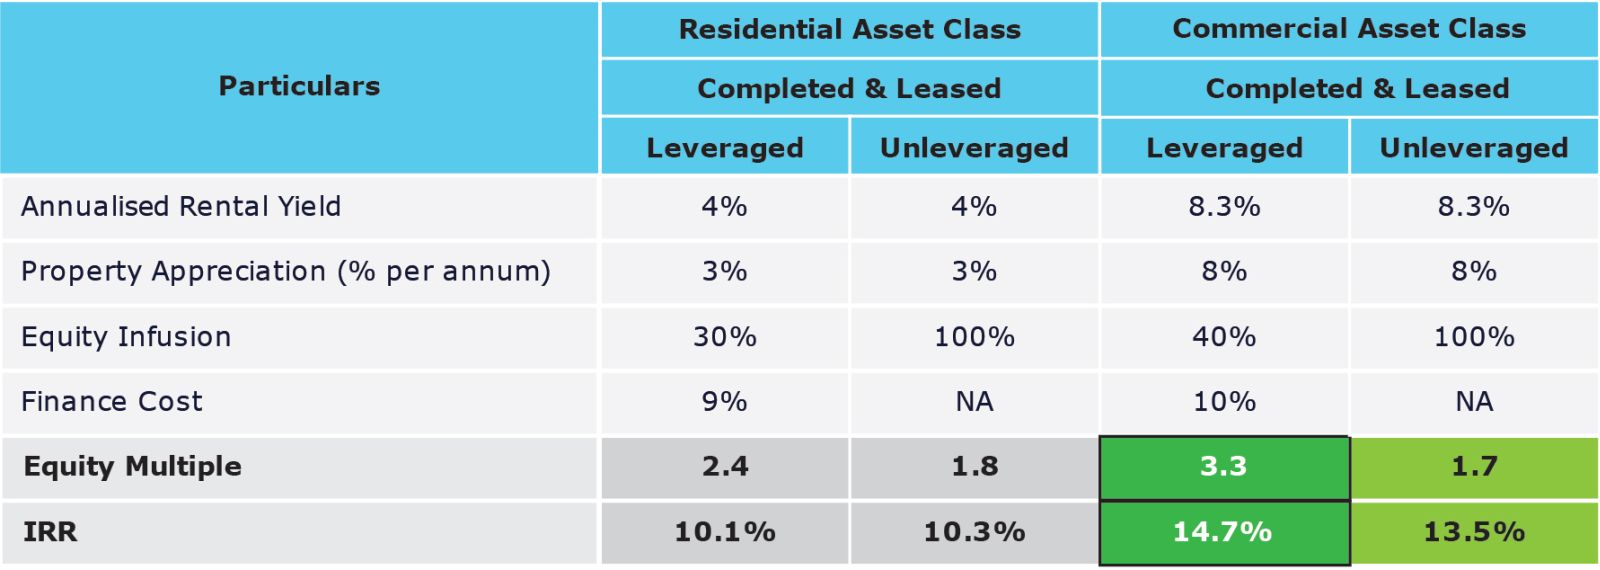 Real Estate An Attractive Asset Class for Investment I Meraqi Real ...